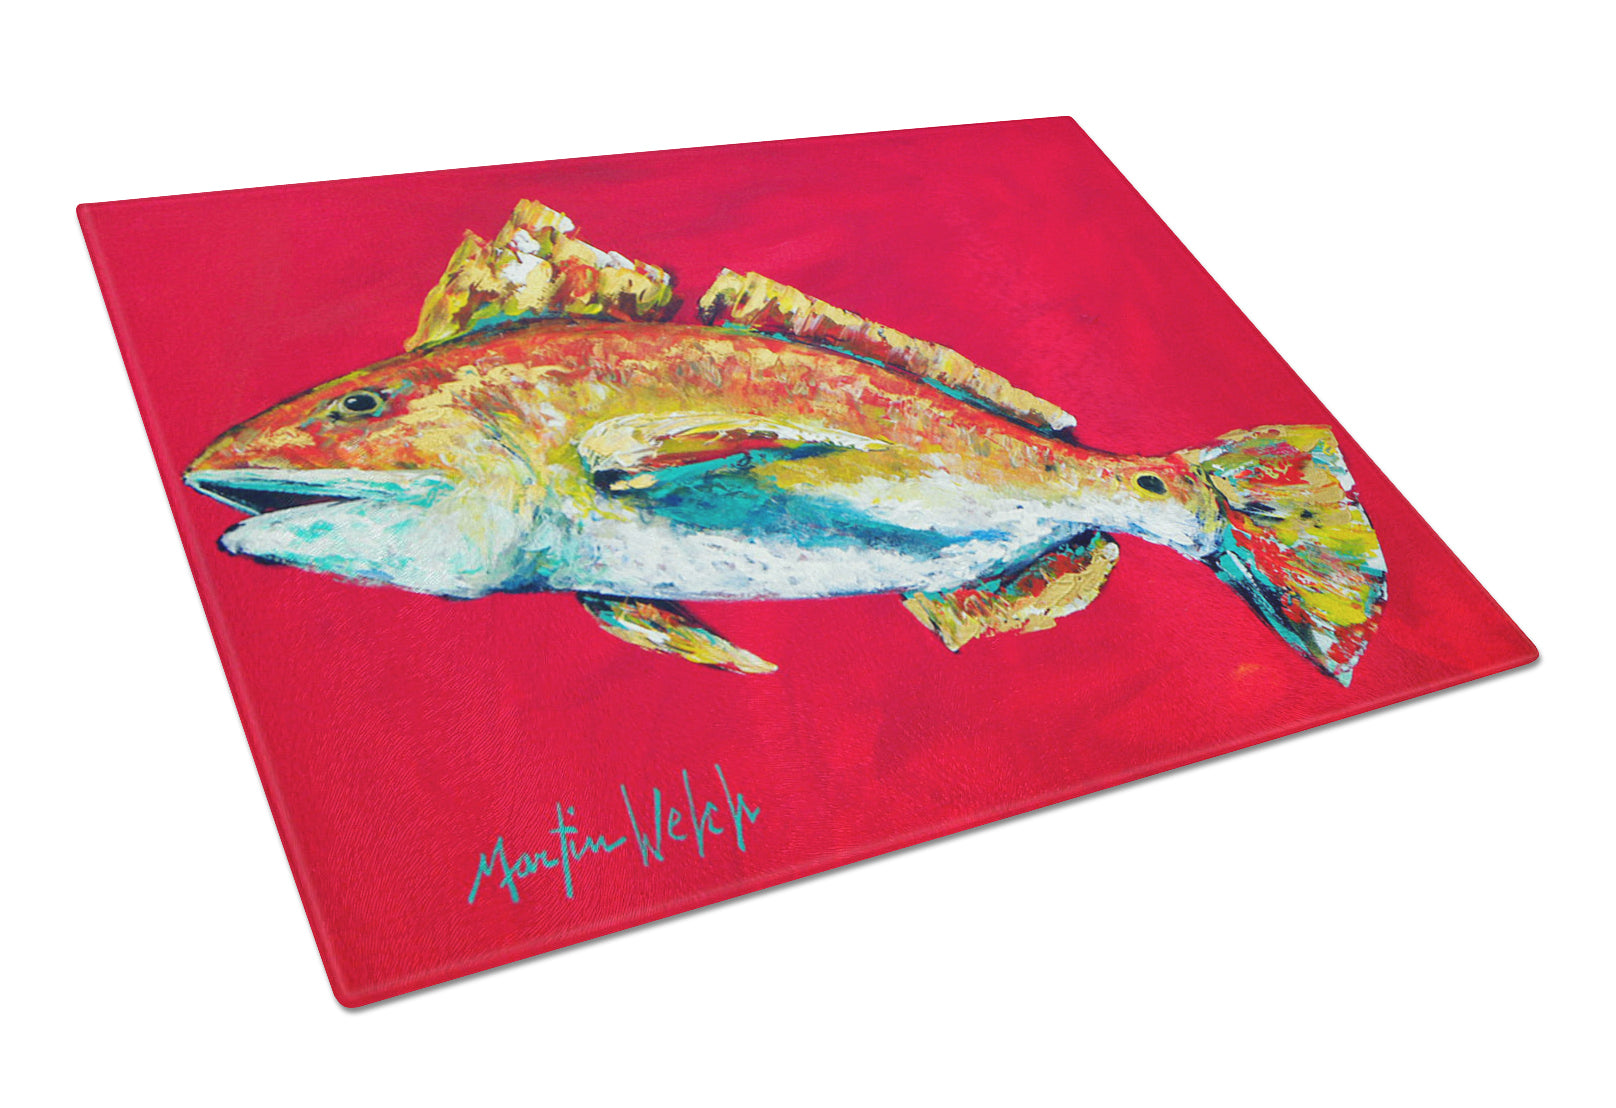 Buy this Fish - Red Fish Woo Hoo Glass Cutting Board Large